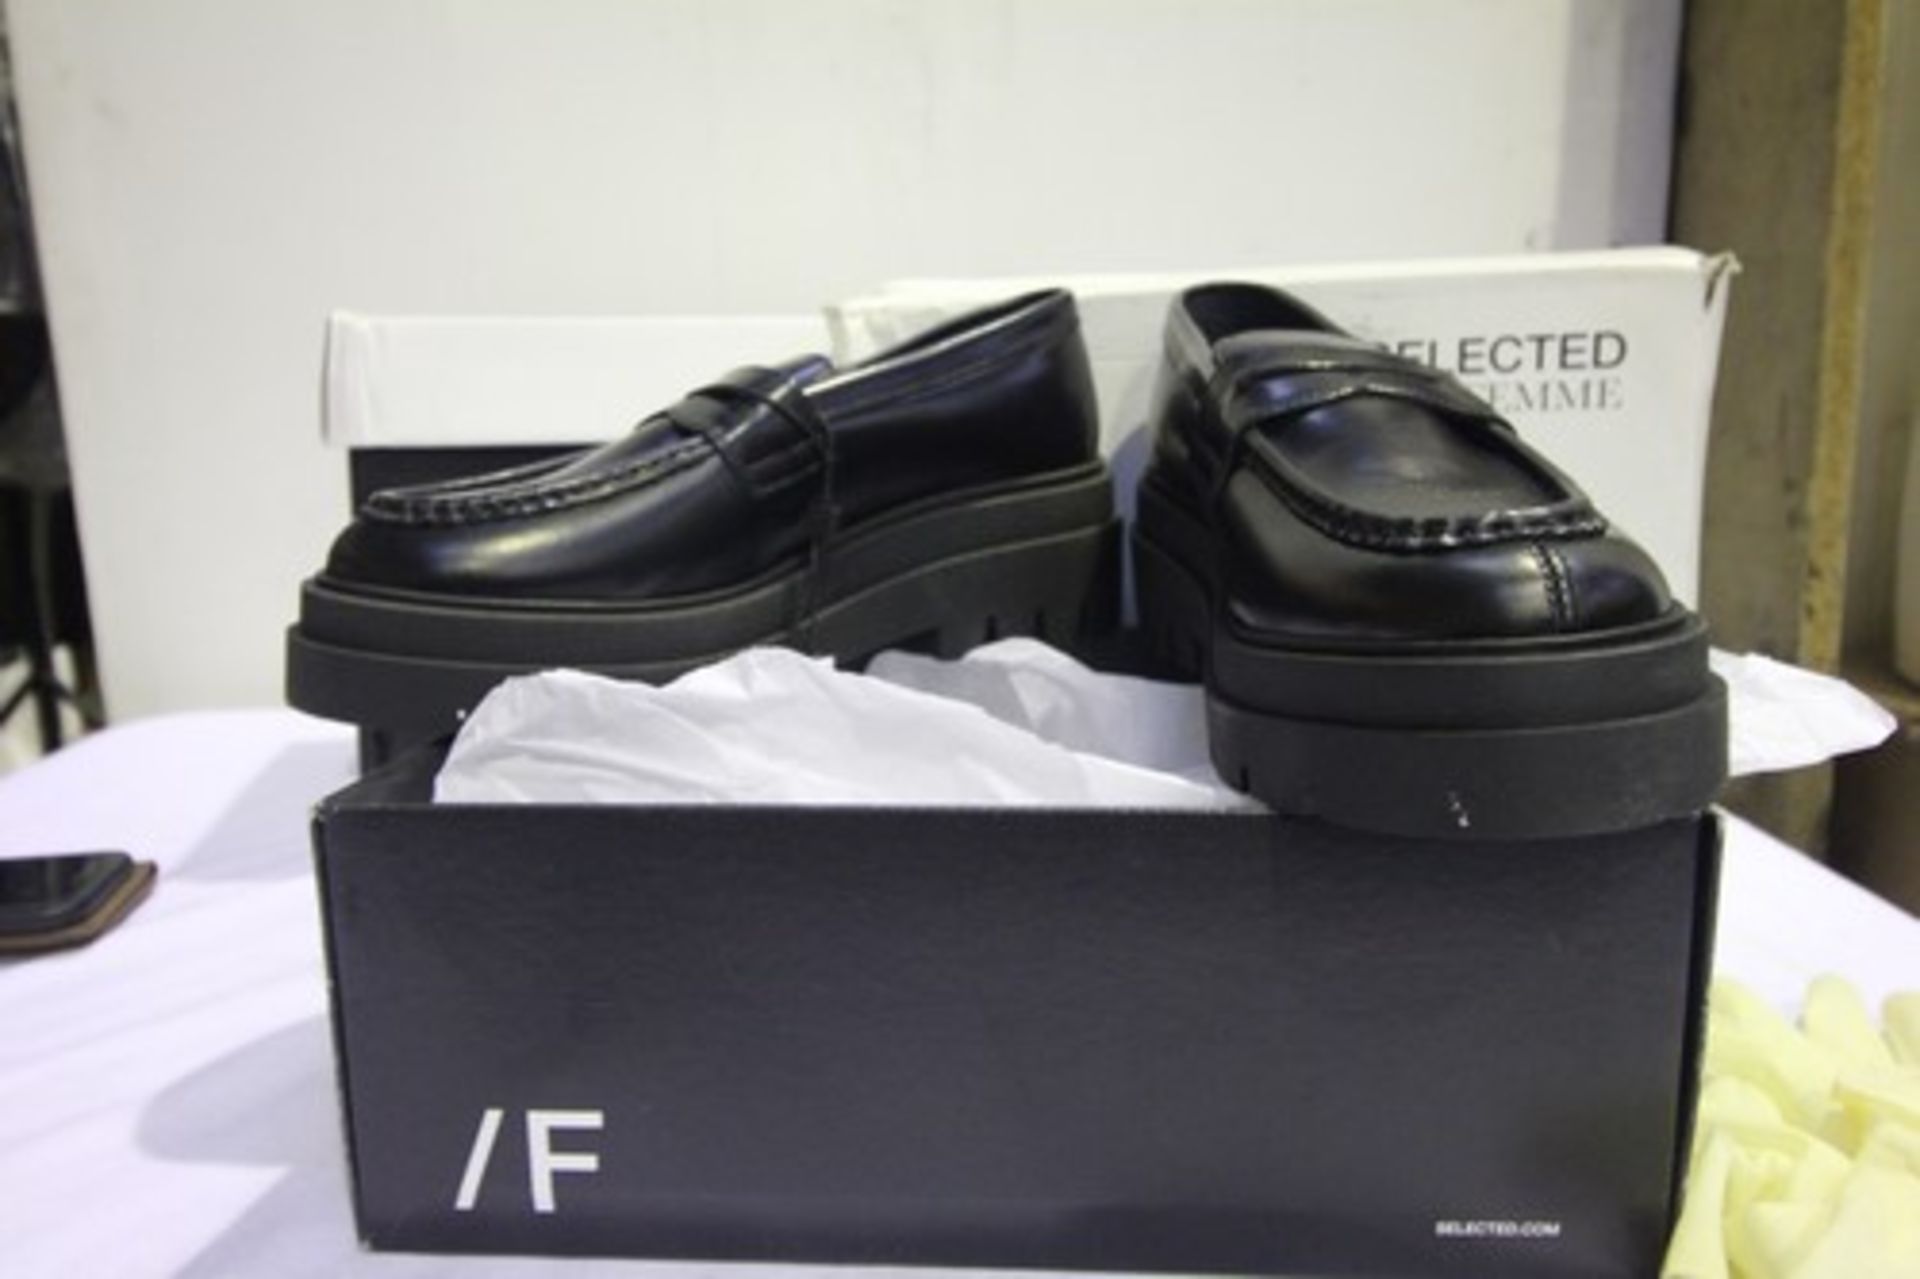 3 x pairs of Selected Femme black loafers, style Juniper Penny Polido, 2 x size UK 5 and 1 x size UK